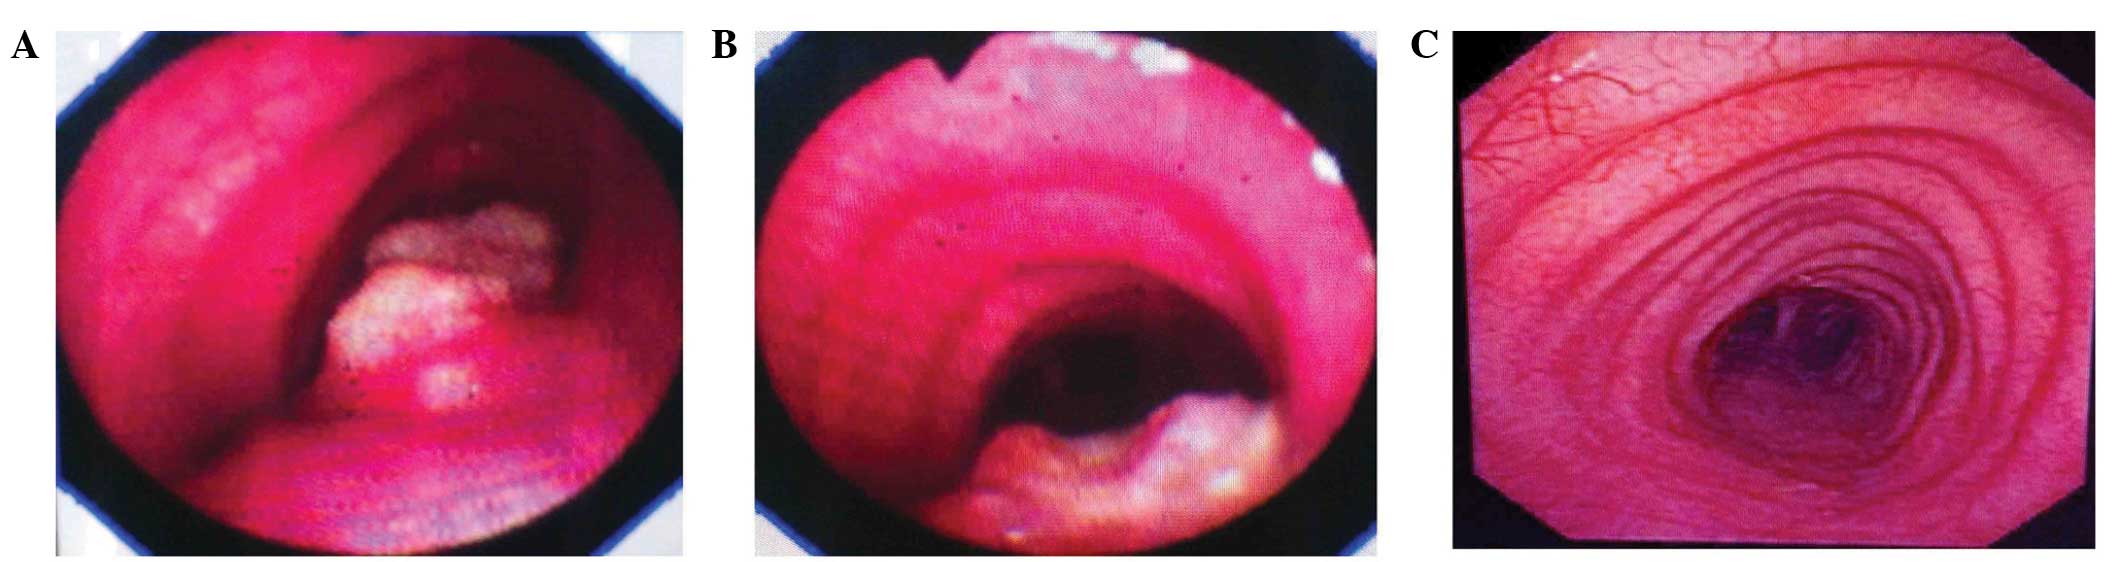 Papilloma in larynx, Romjoh 8 (1) by Innovation in Health Center - Issuu